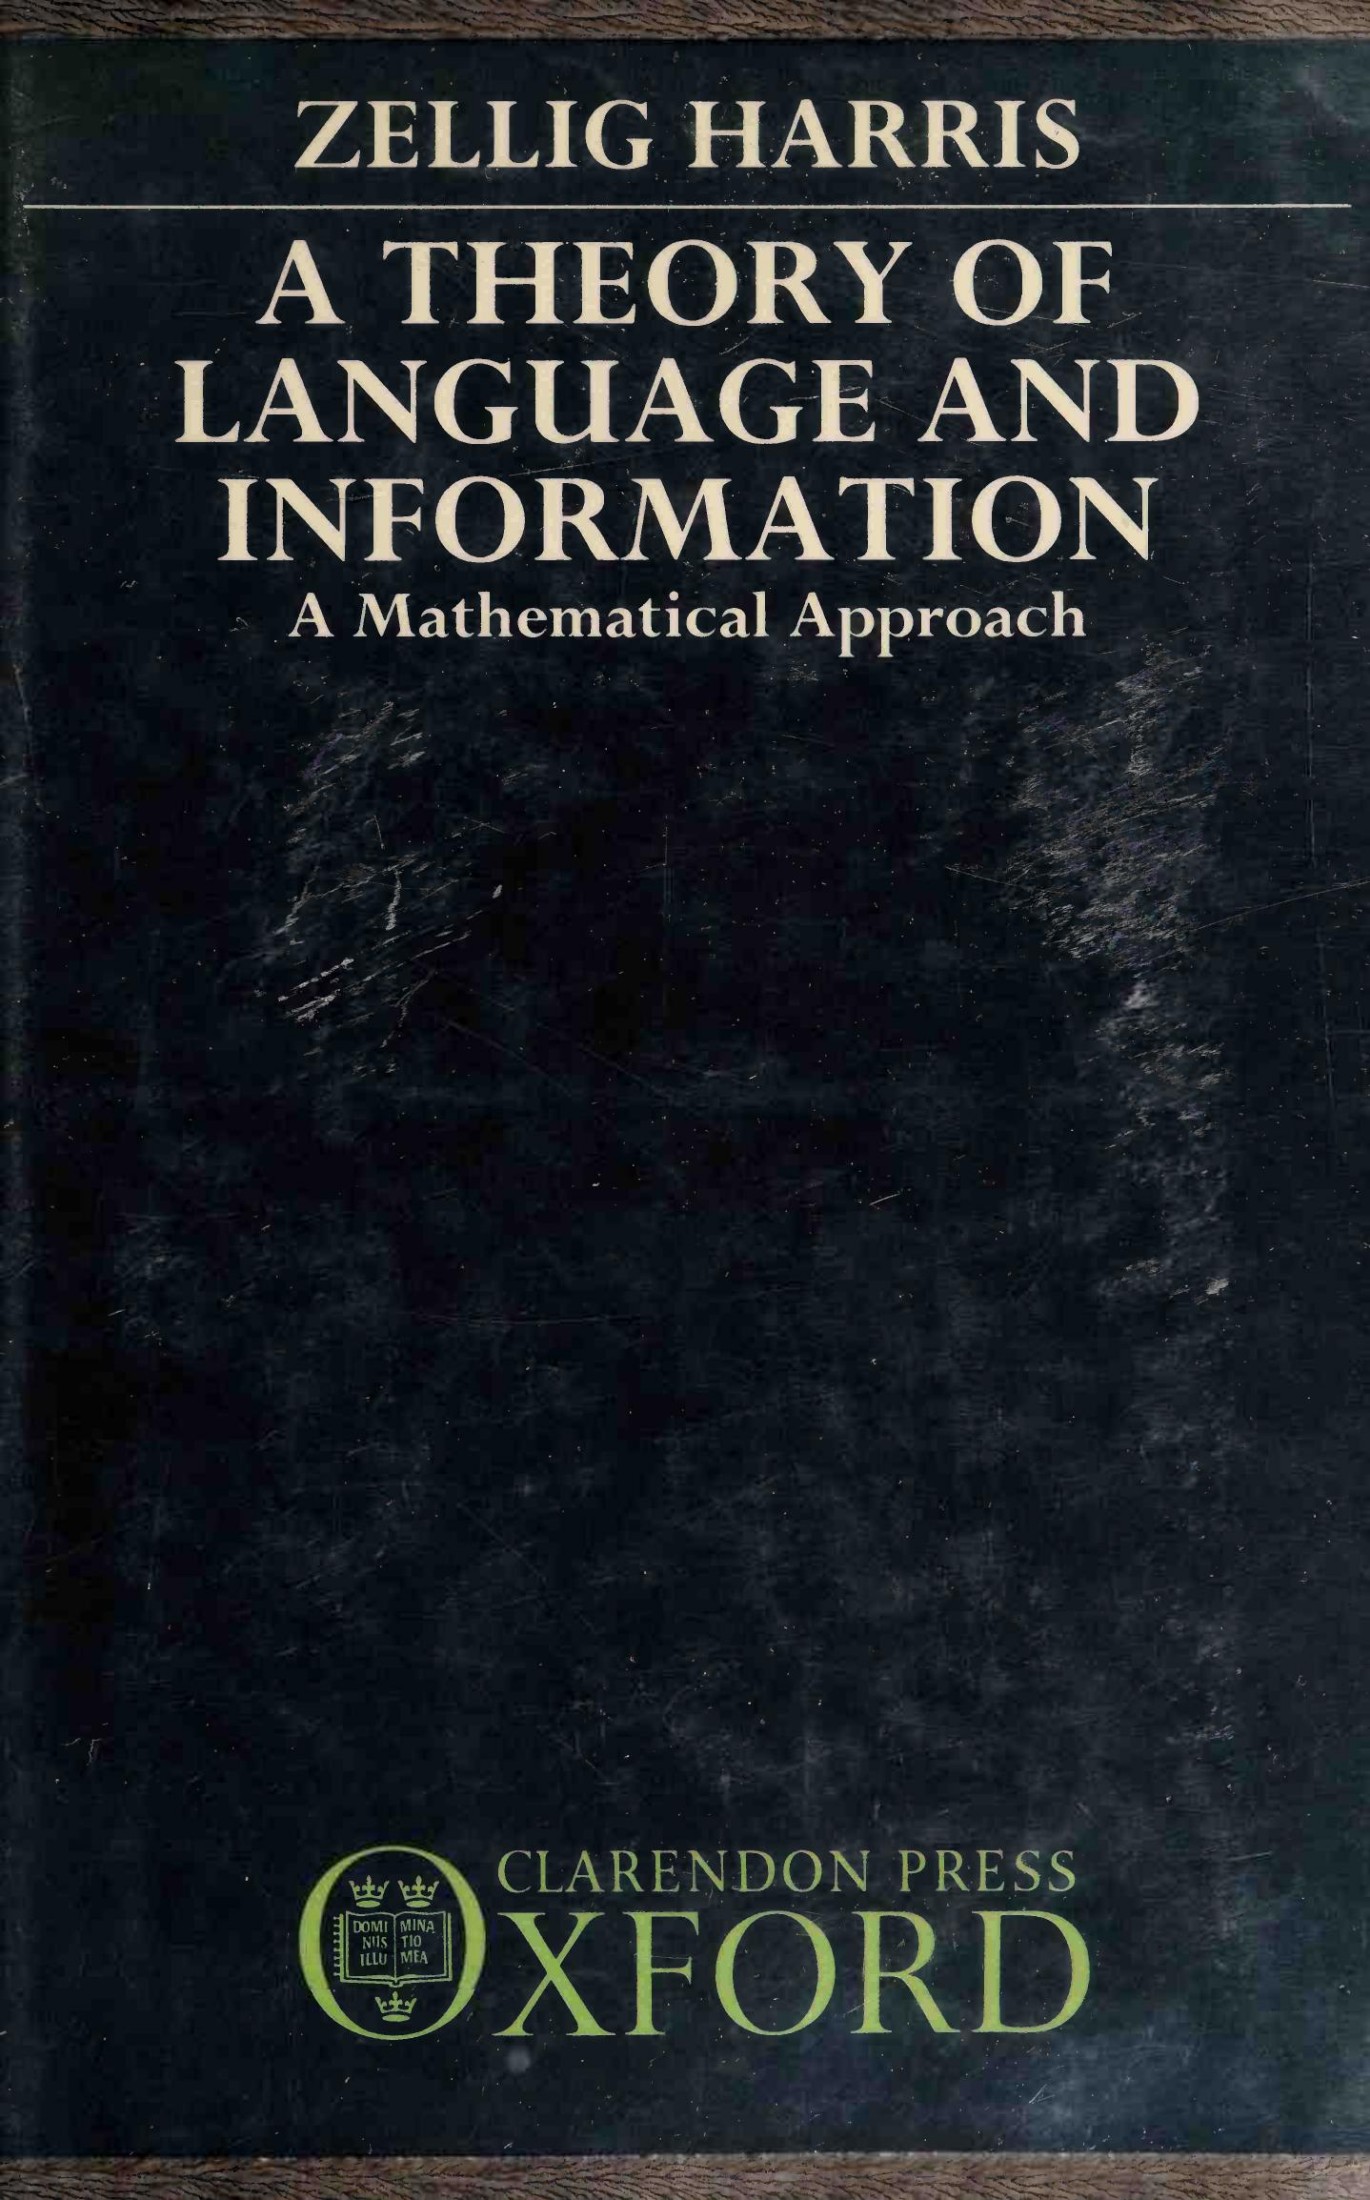 A Theory of Language and Information: A Mathematical Approach